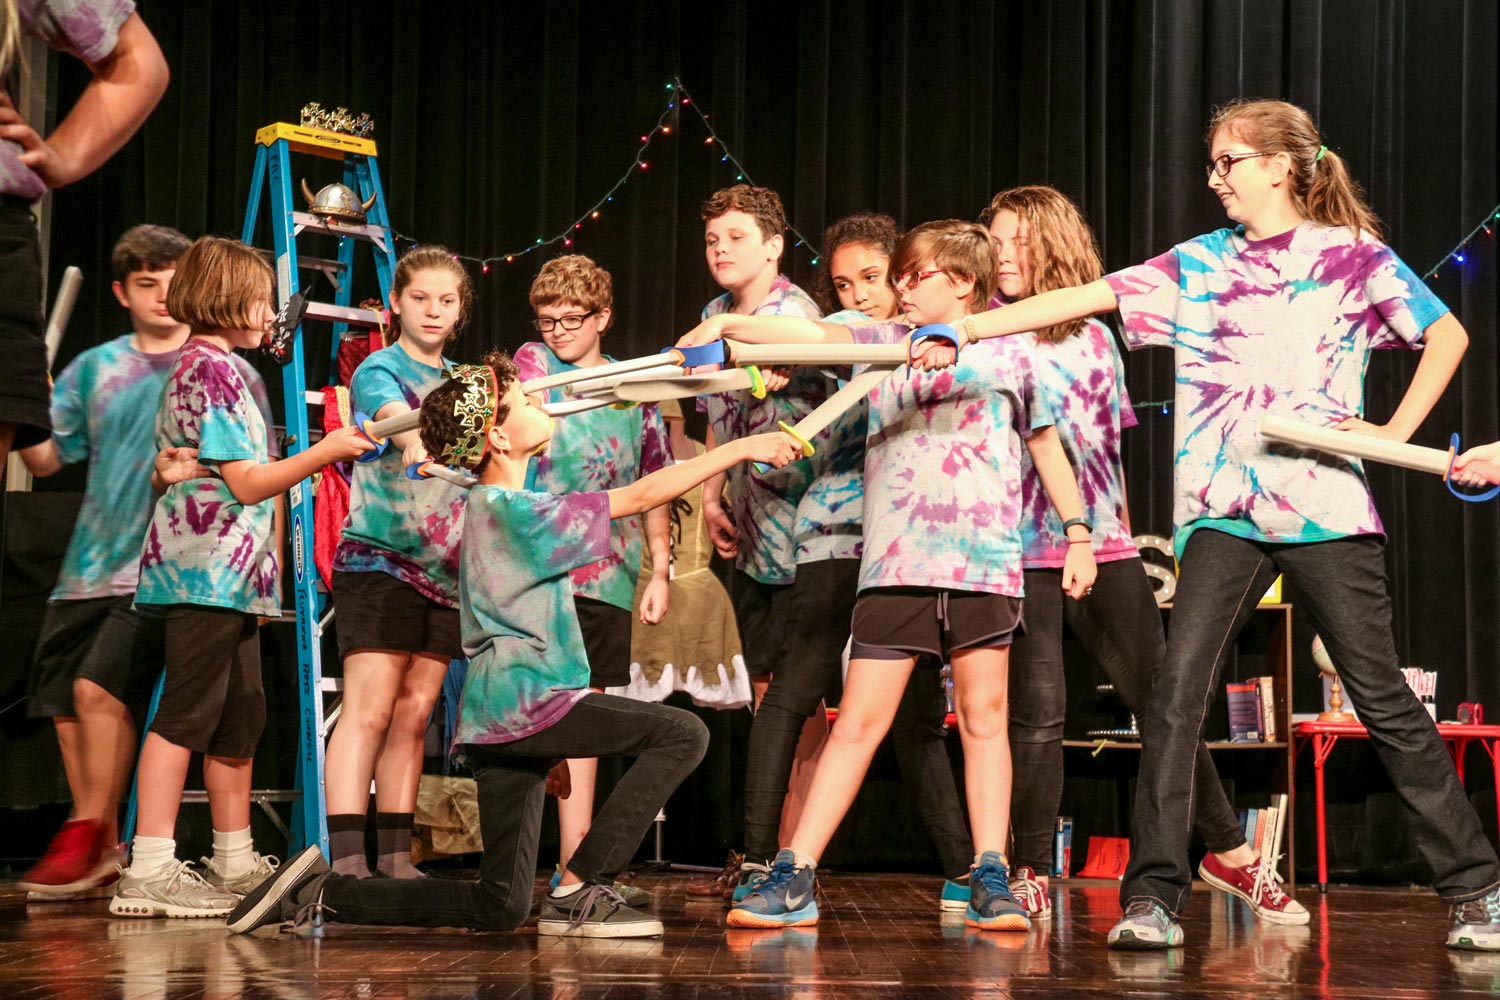 Children point fake swords at another student who is in the middle during a theater camp